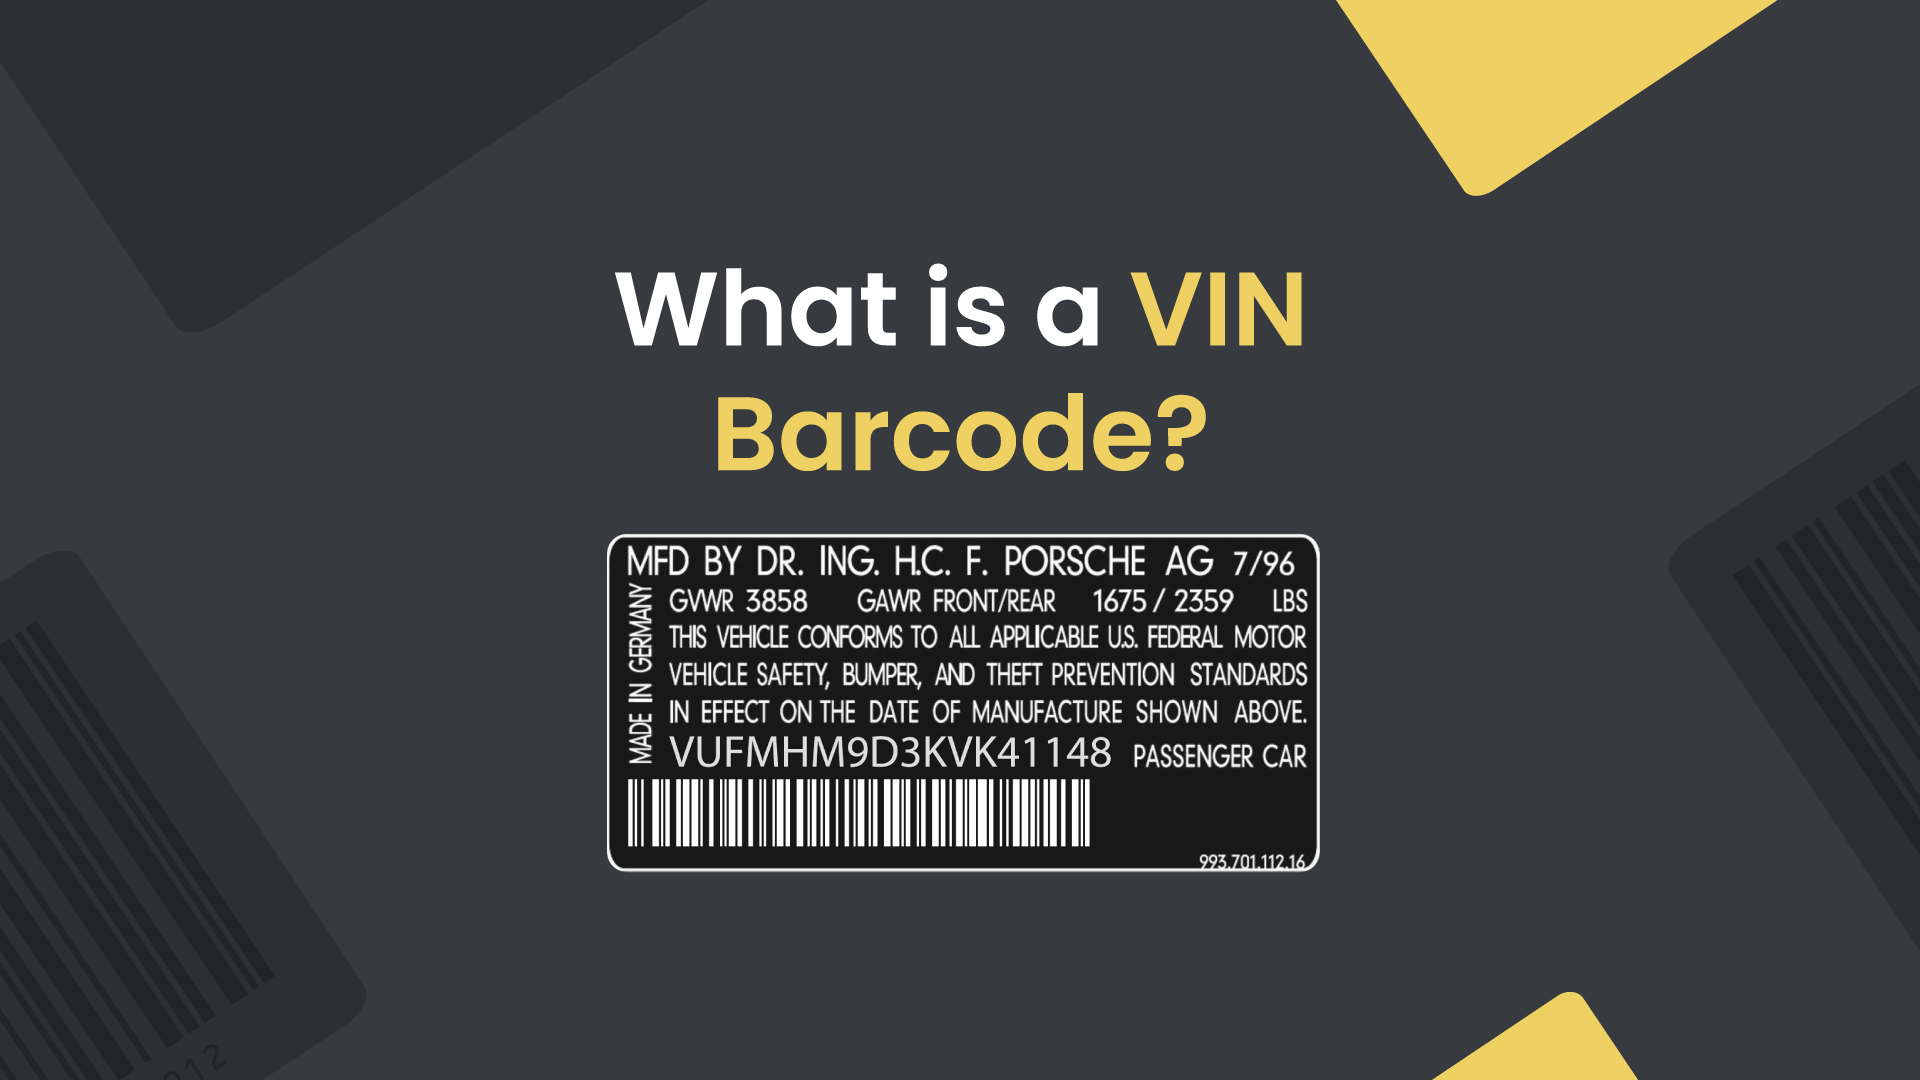 What is a VIN barcode?